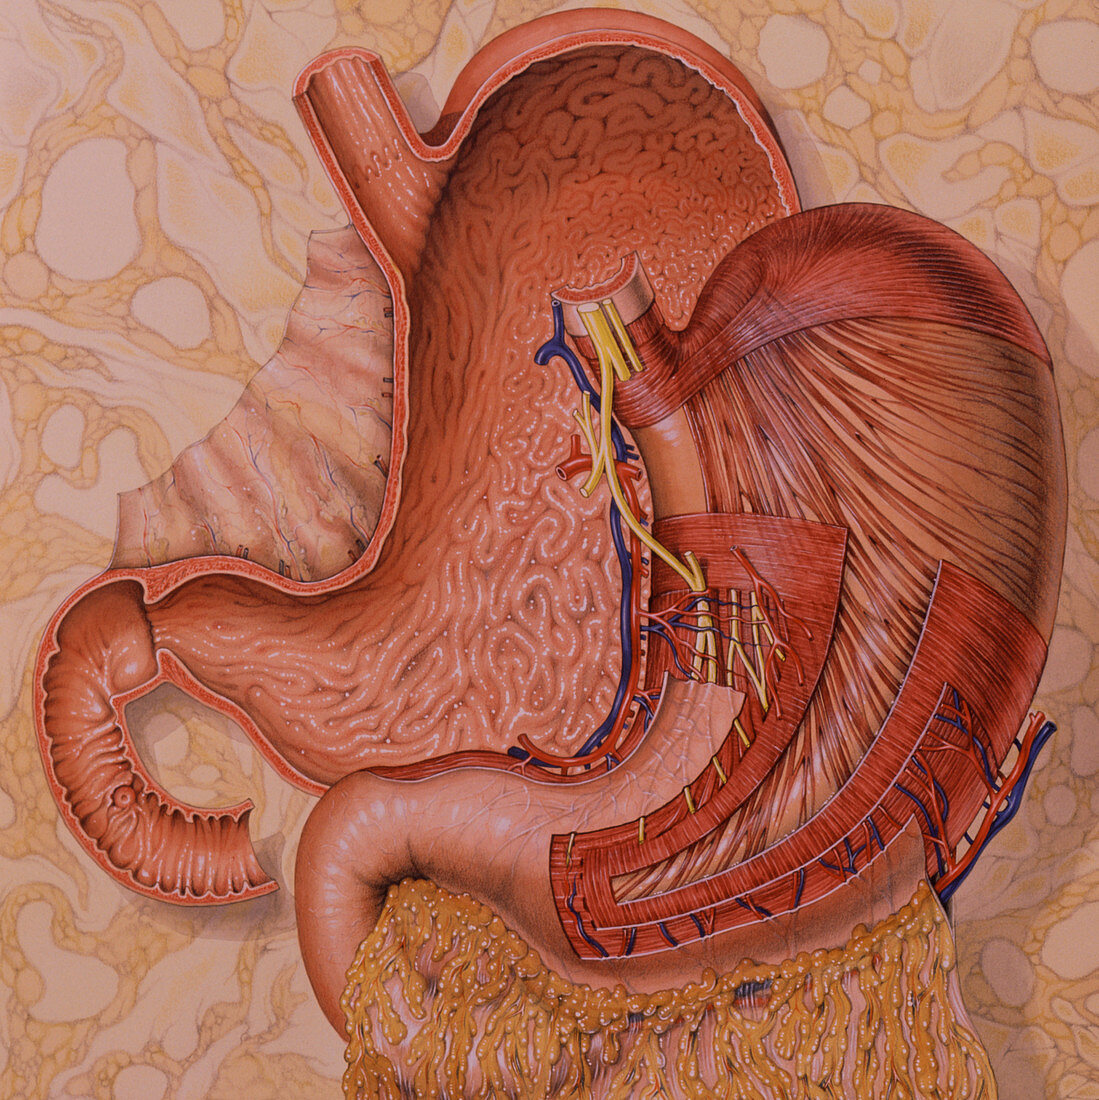 Artwork showing stomach; lining and muscle wall